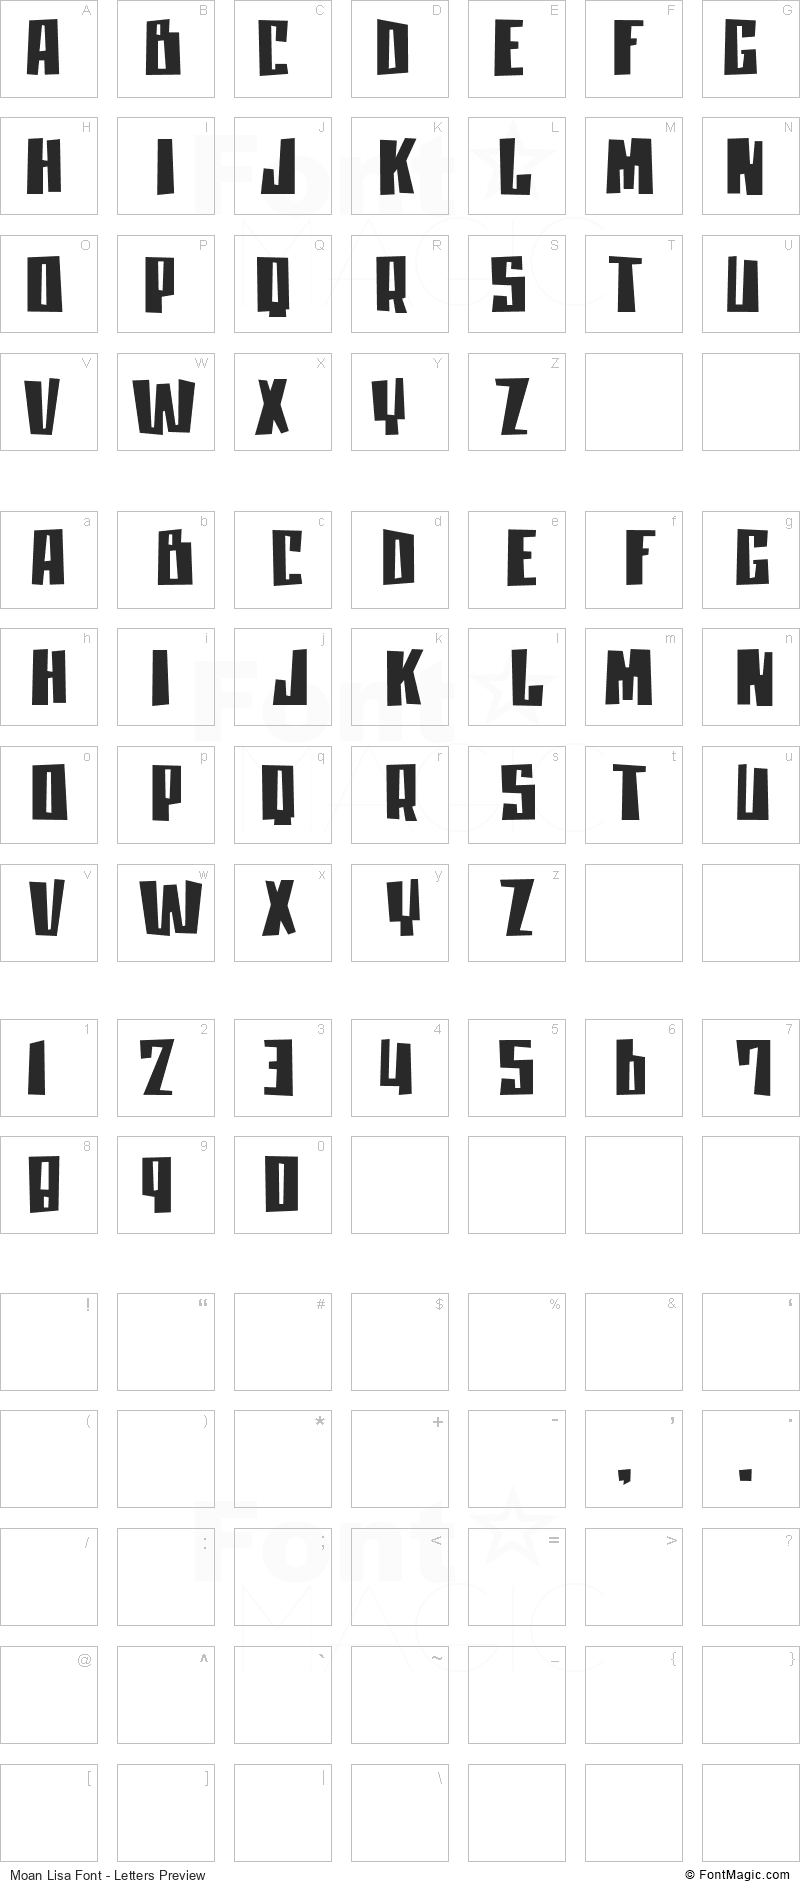 Moan Lisa Font - All Latters Preview Chart